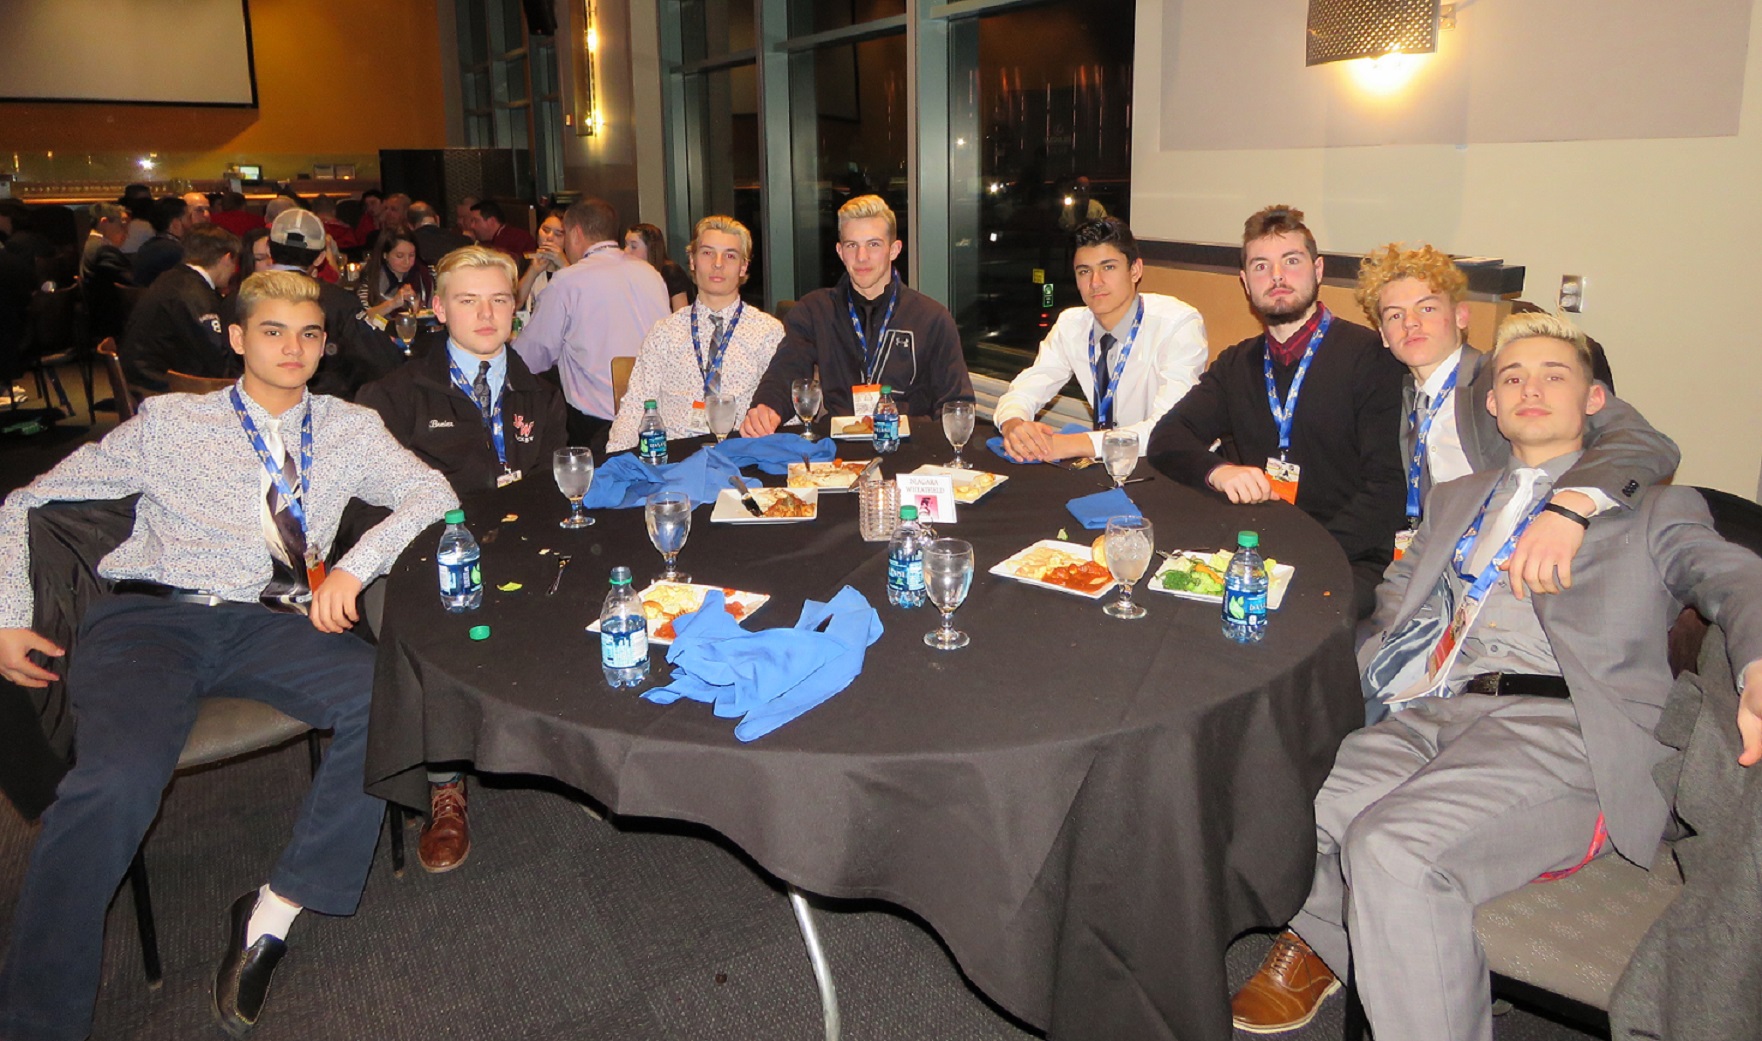 Members of the Niagara-Wheatfield Falcons hockey team take in the state tournament dinner Friday night at the Lexus Club in the KeyBank Center. From left: Dylan Woods, Nick Breier, Nick Peters, Zack Belter, Chace Woods, Chris Tobey, Michael Lotempio and Dom Pulli. (Photo by David Yarger)